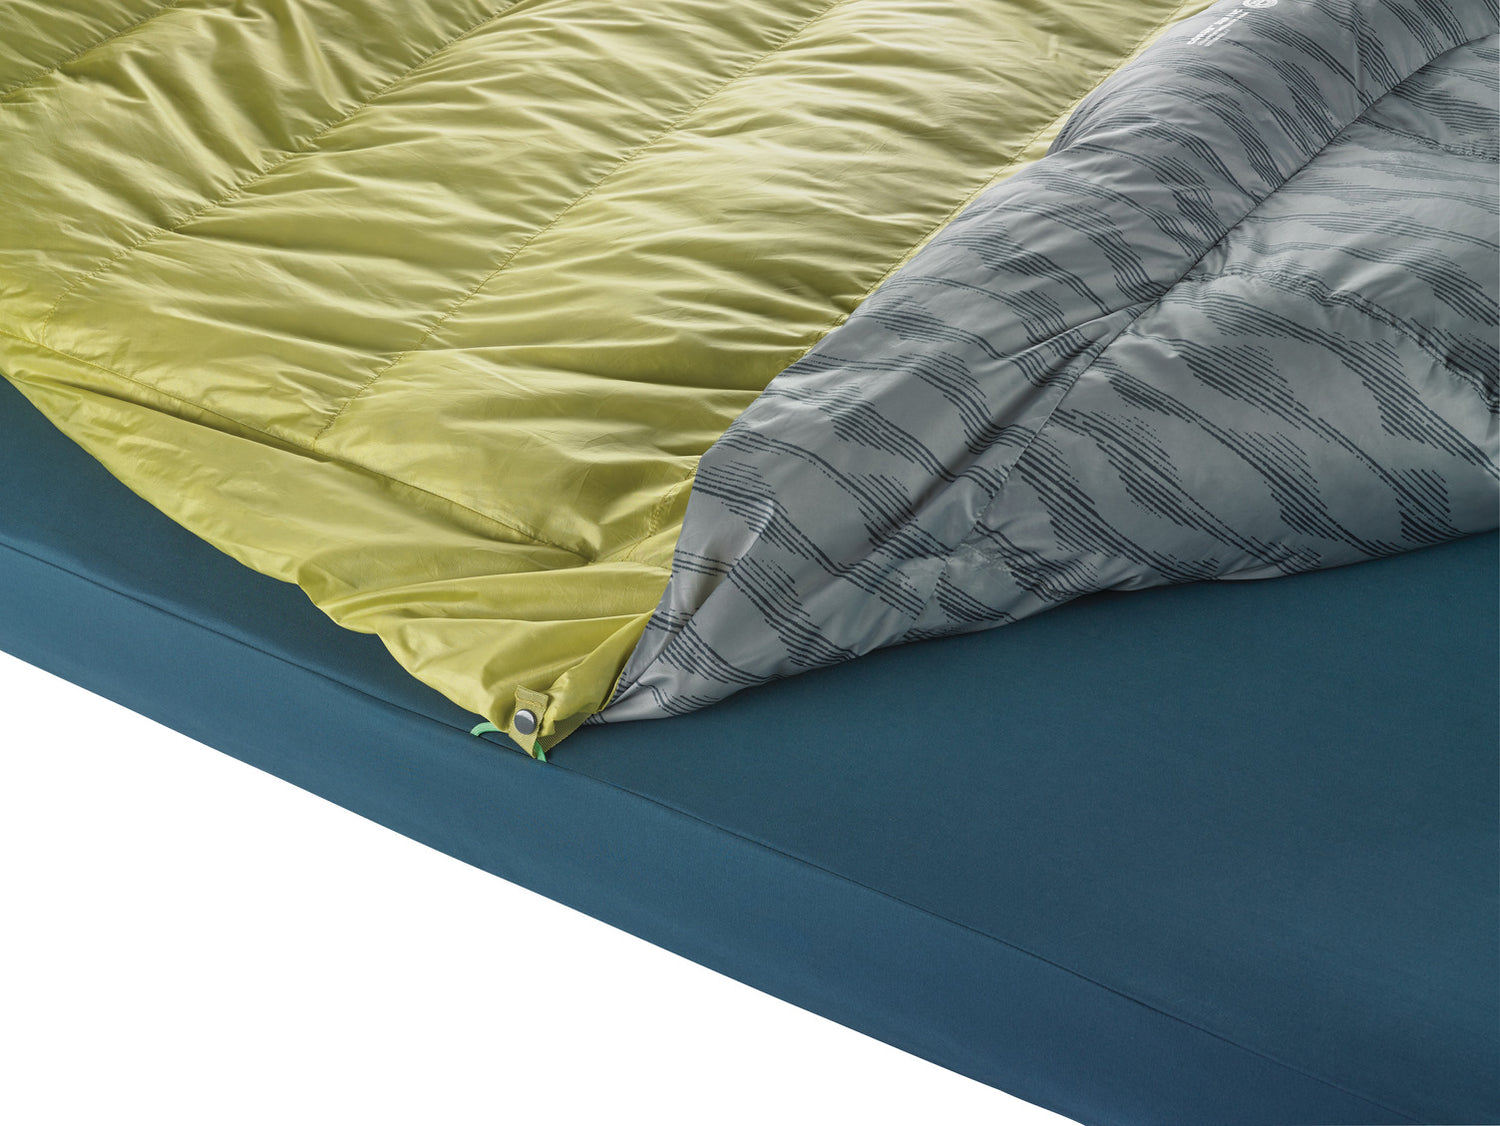 Thermarest Synergy Luxe Sheet 25